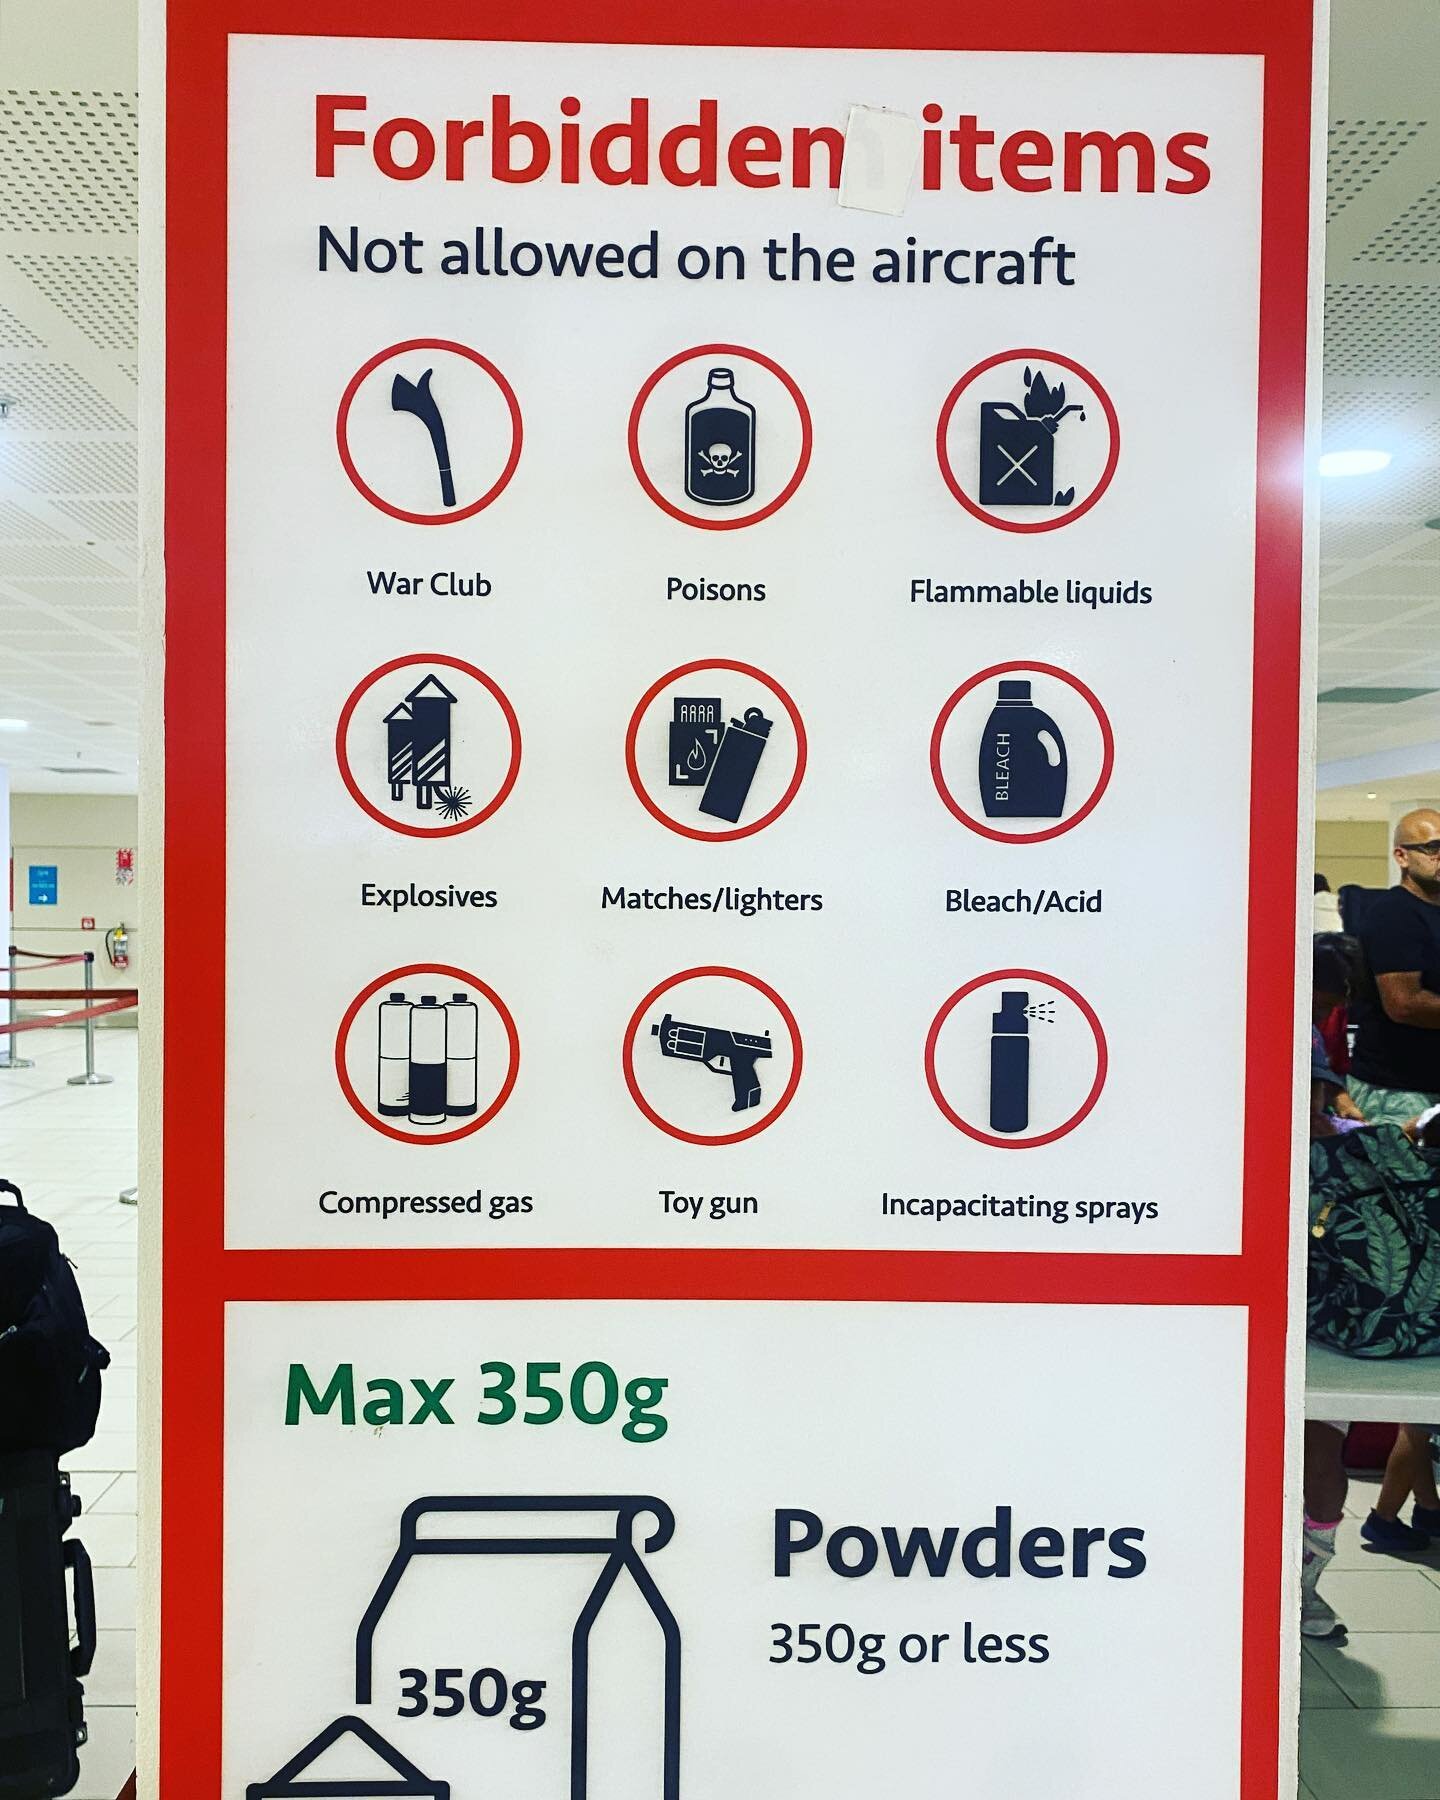 Nadi Airport, Fiji - There are always little signs that subtly tell you &ldquo;you&rsquo;re in a different country.&rdquo; I just wonder how much of a problem item #1 is on planes.